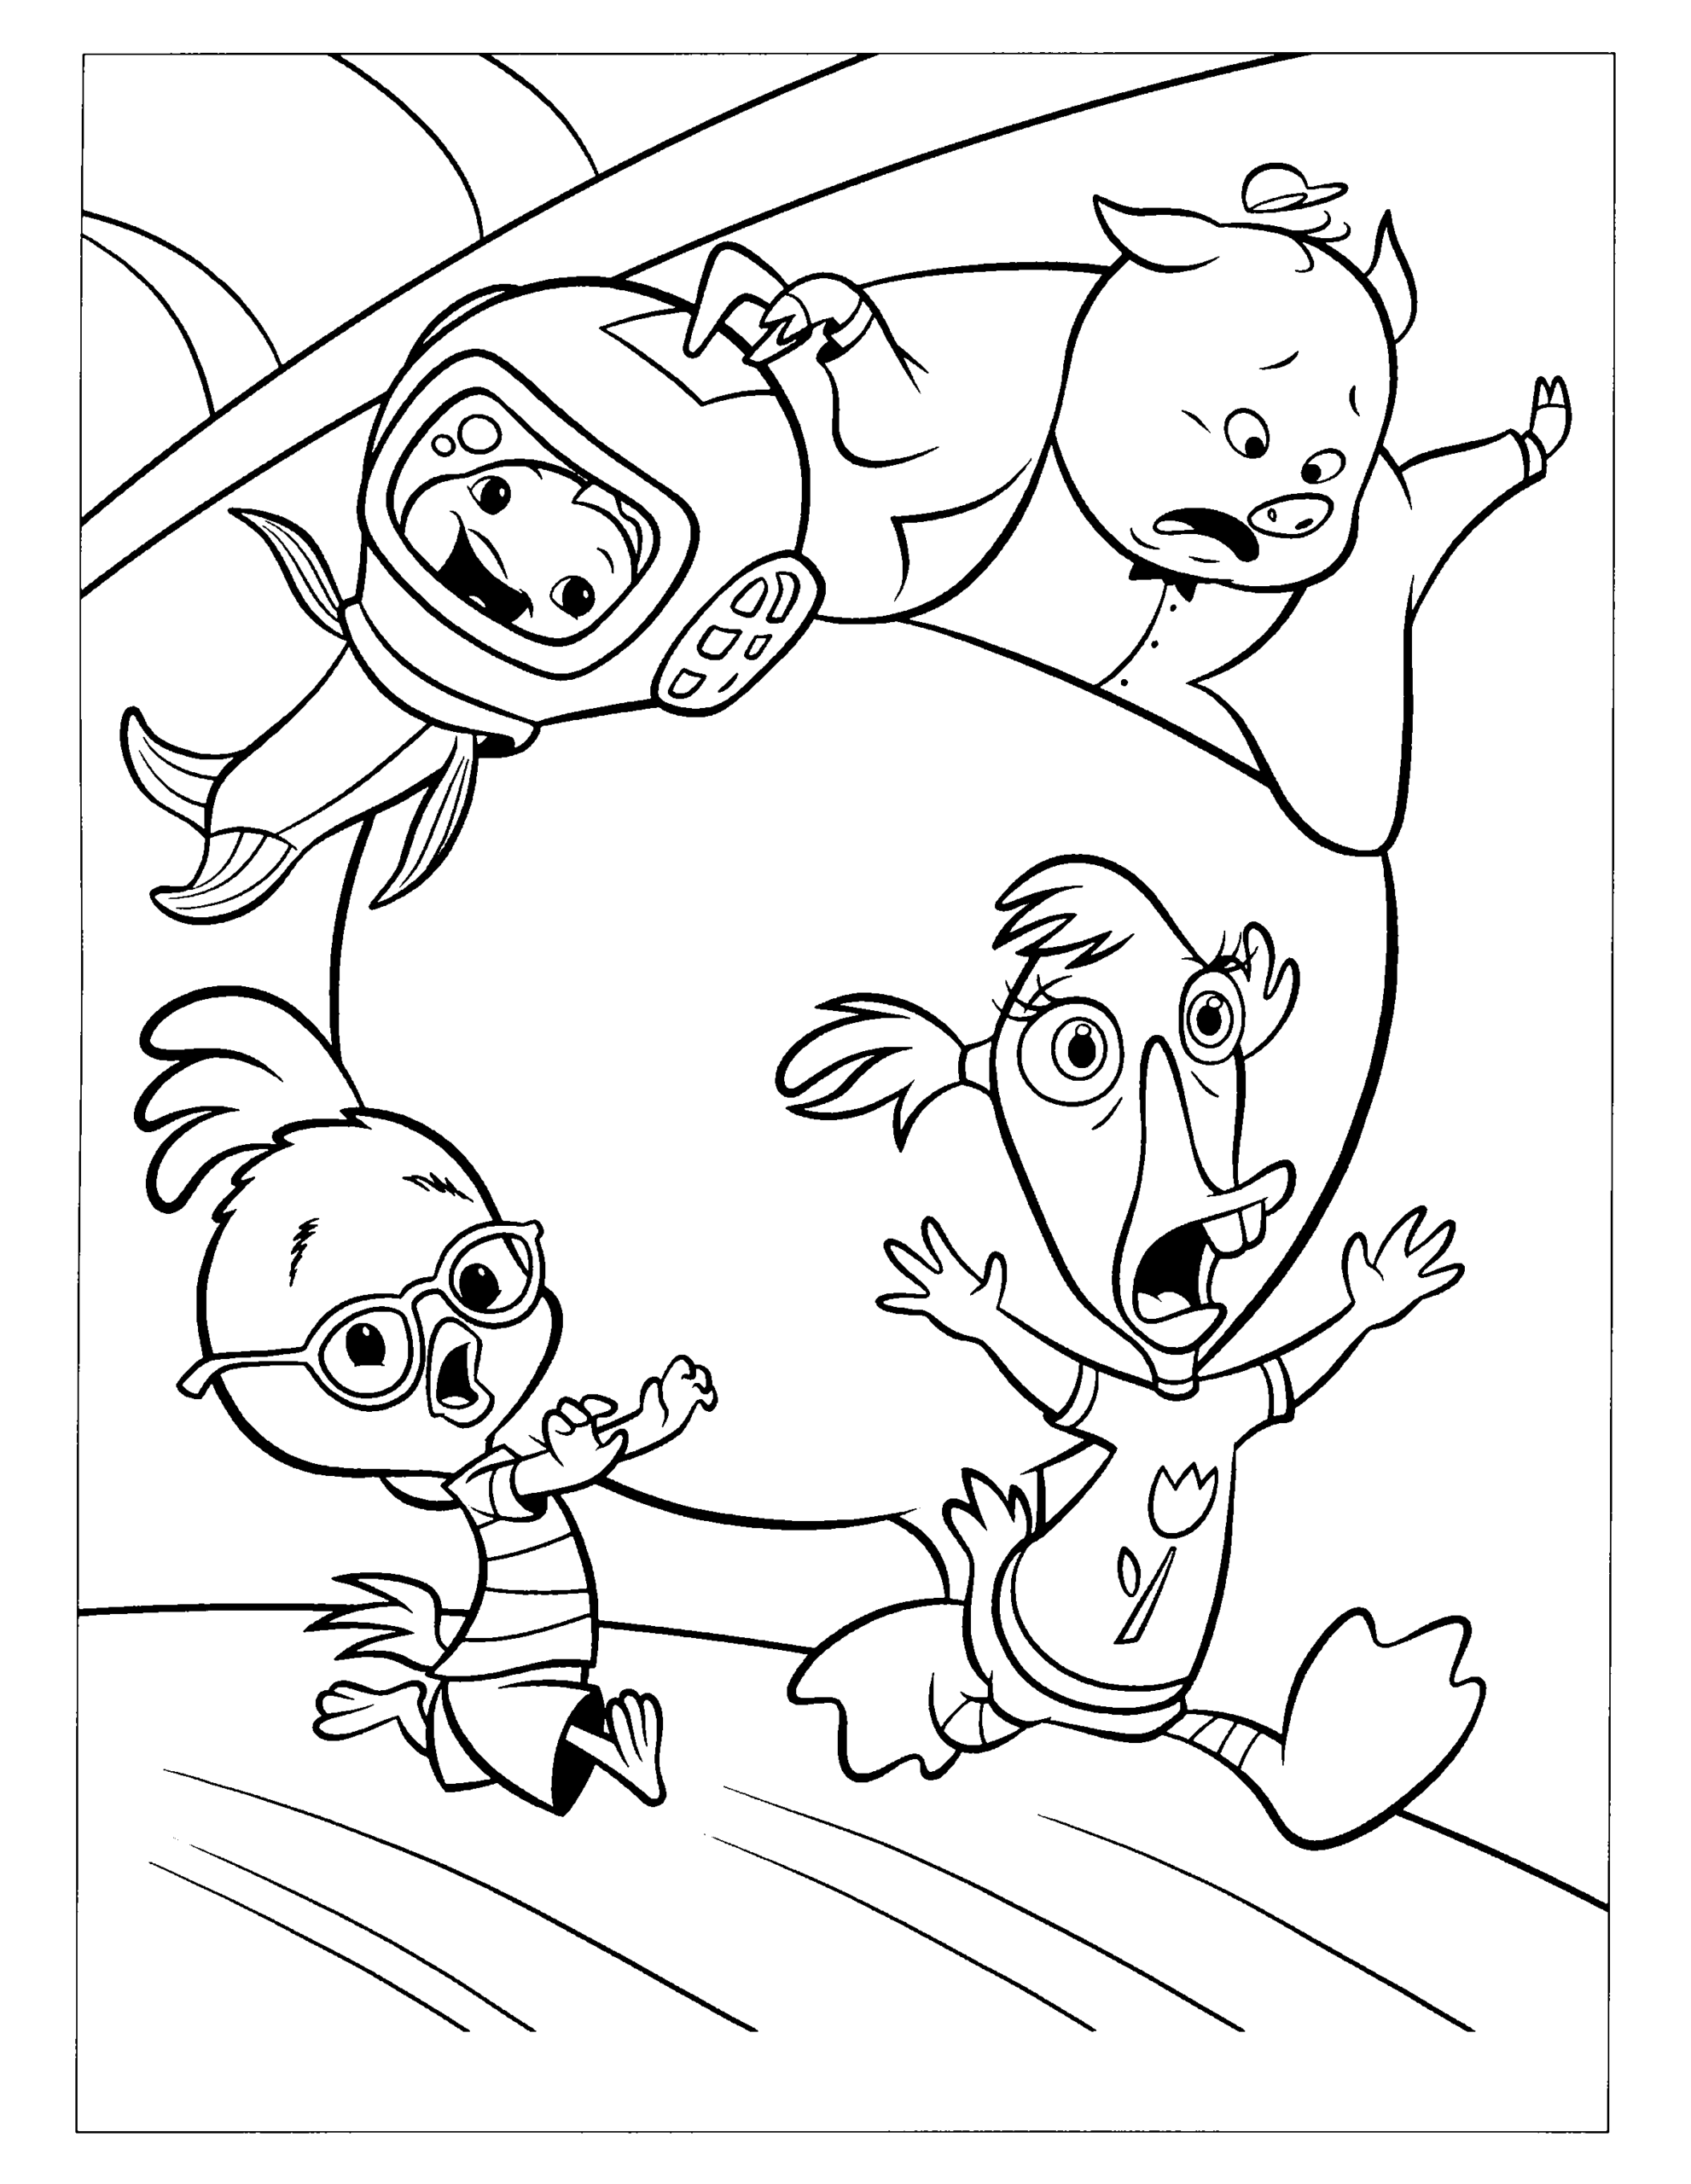 Chicken Little Coloring Pages TV Film chicken little 5 Printable 2020 02091 Coloring4free